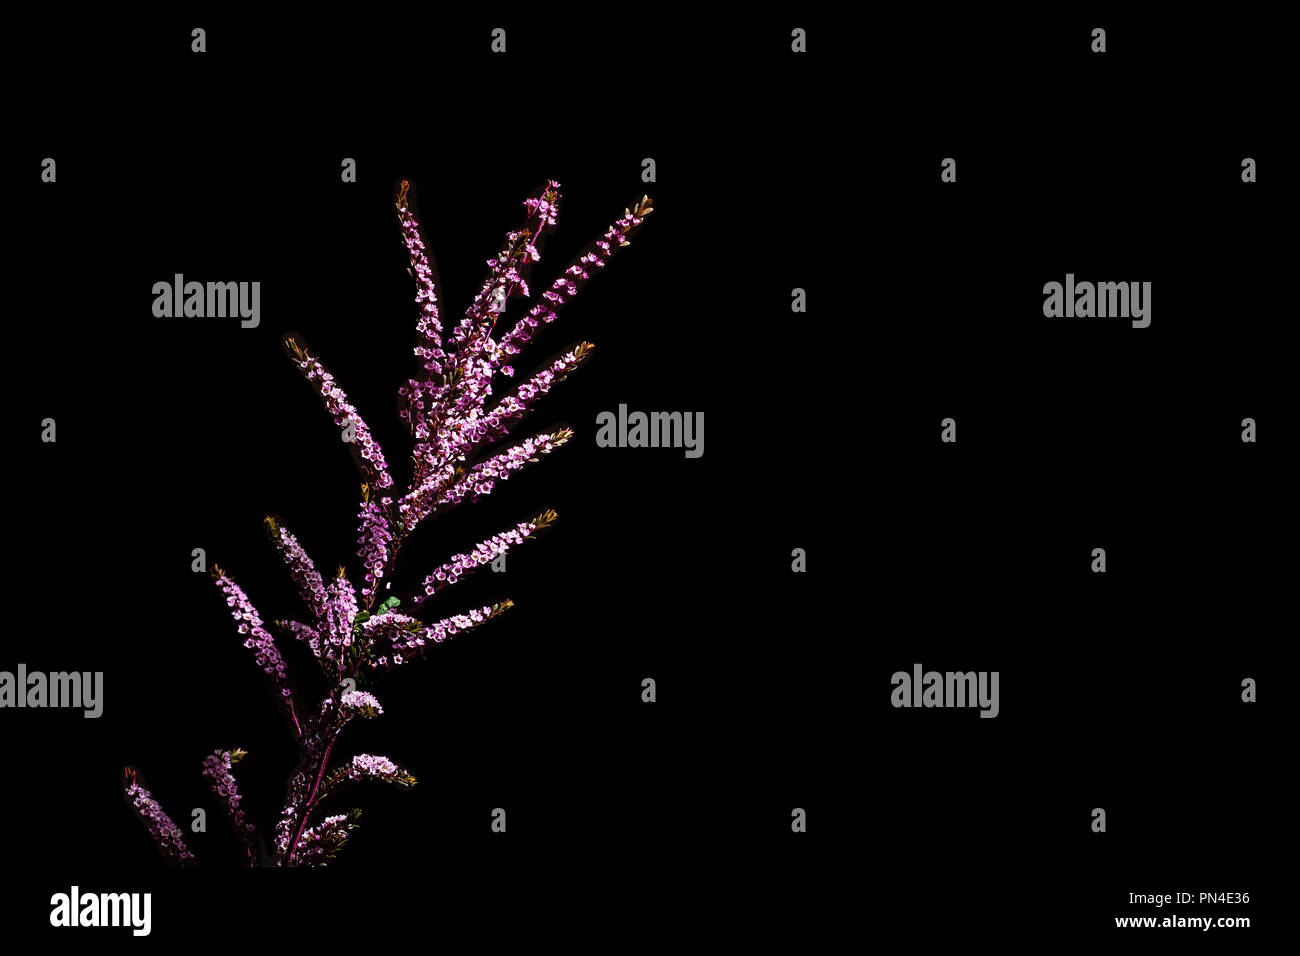 Endemic Australian plant with beautiful small red flowers - Geraldton Wax isolated on black background Stock Photo